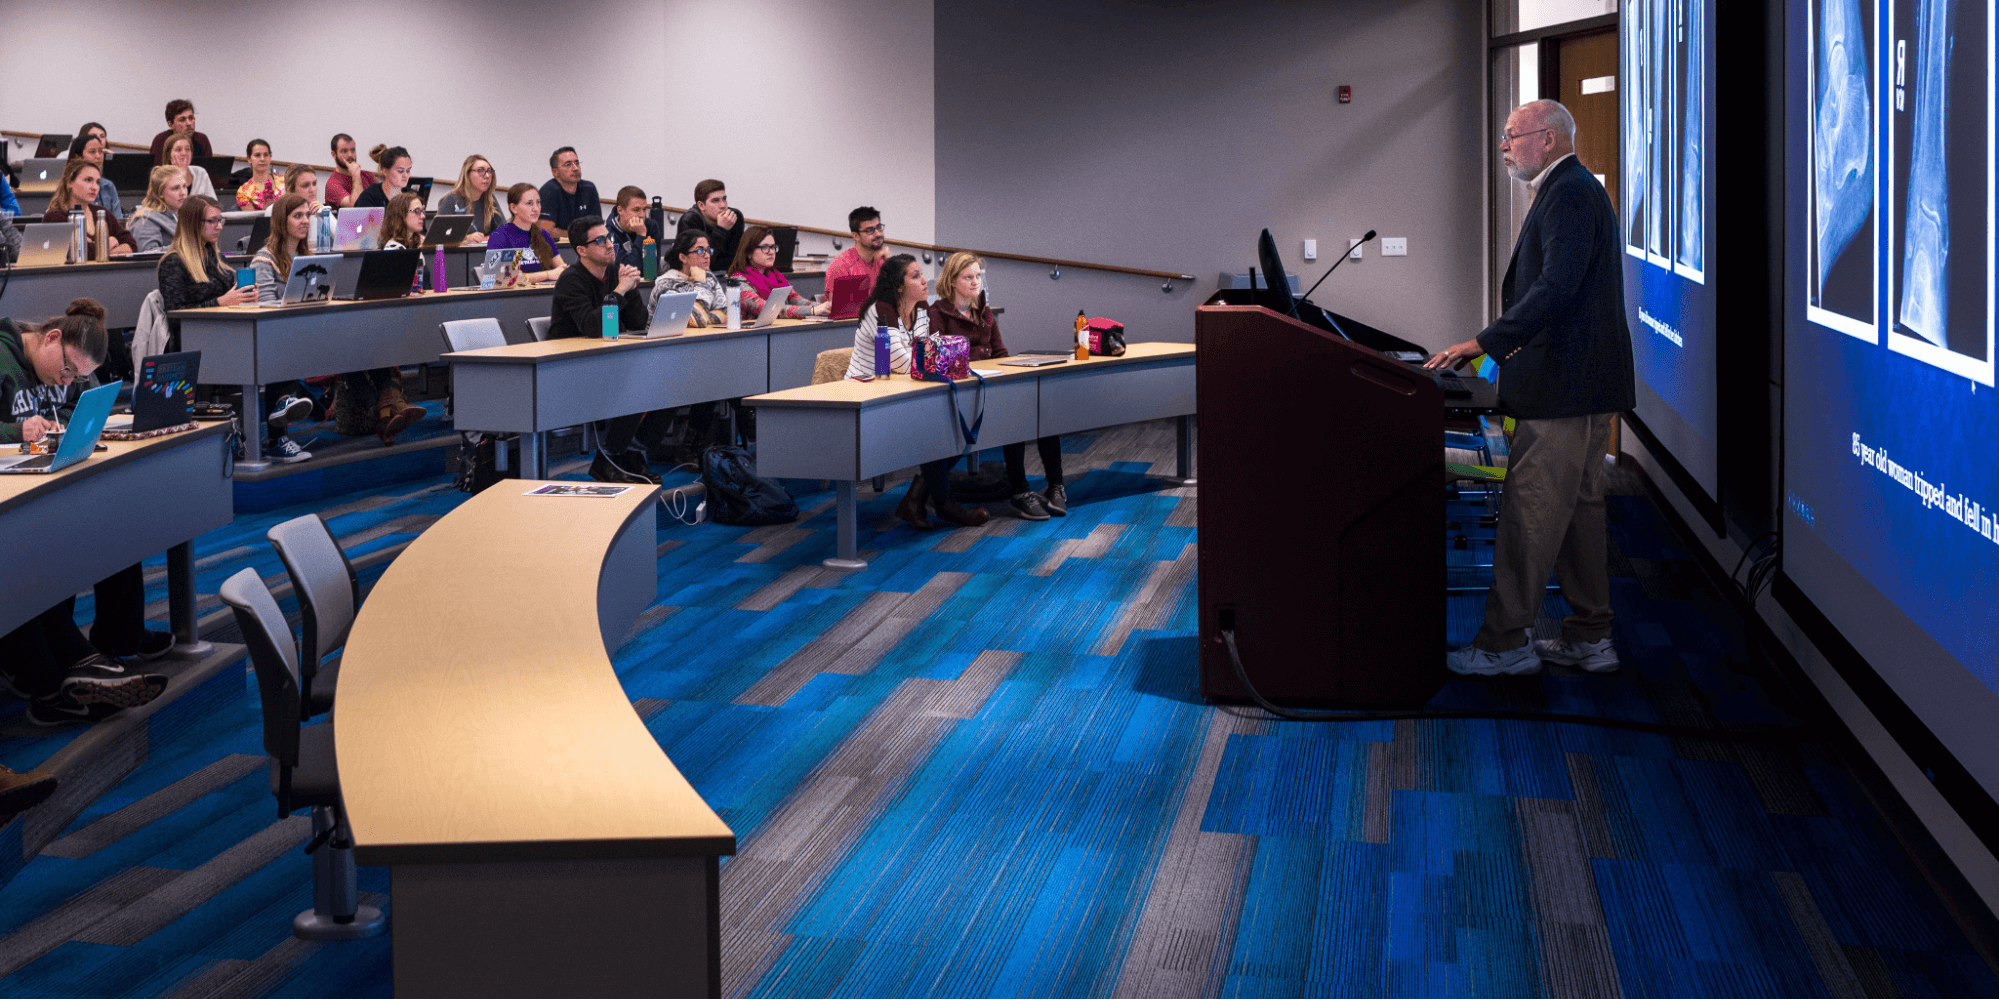 A professor at Chatham University speaking to students in a lecture hall.